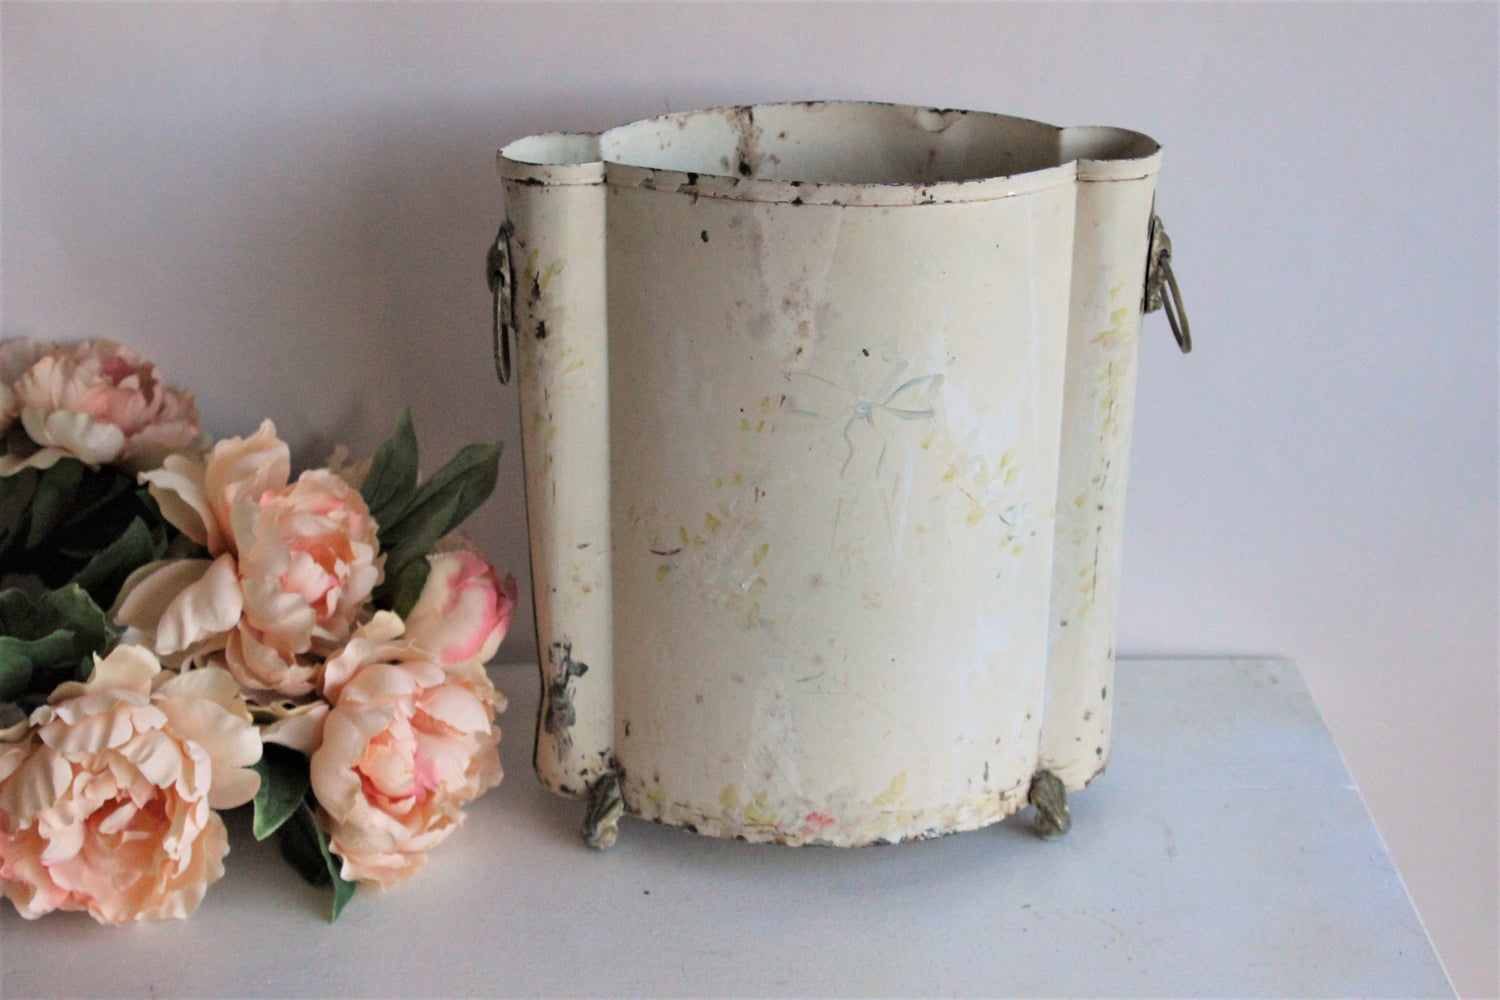 Vintage 1950s Tole Painted Metal Trash Can